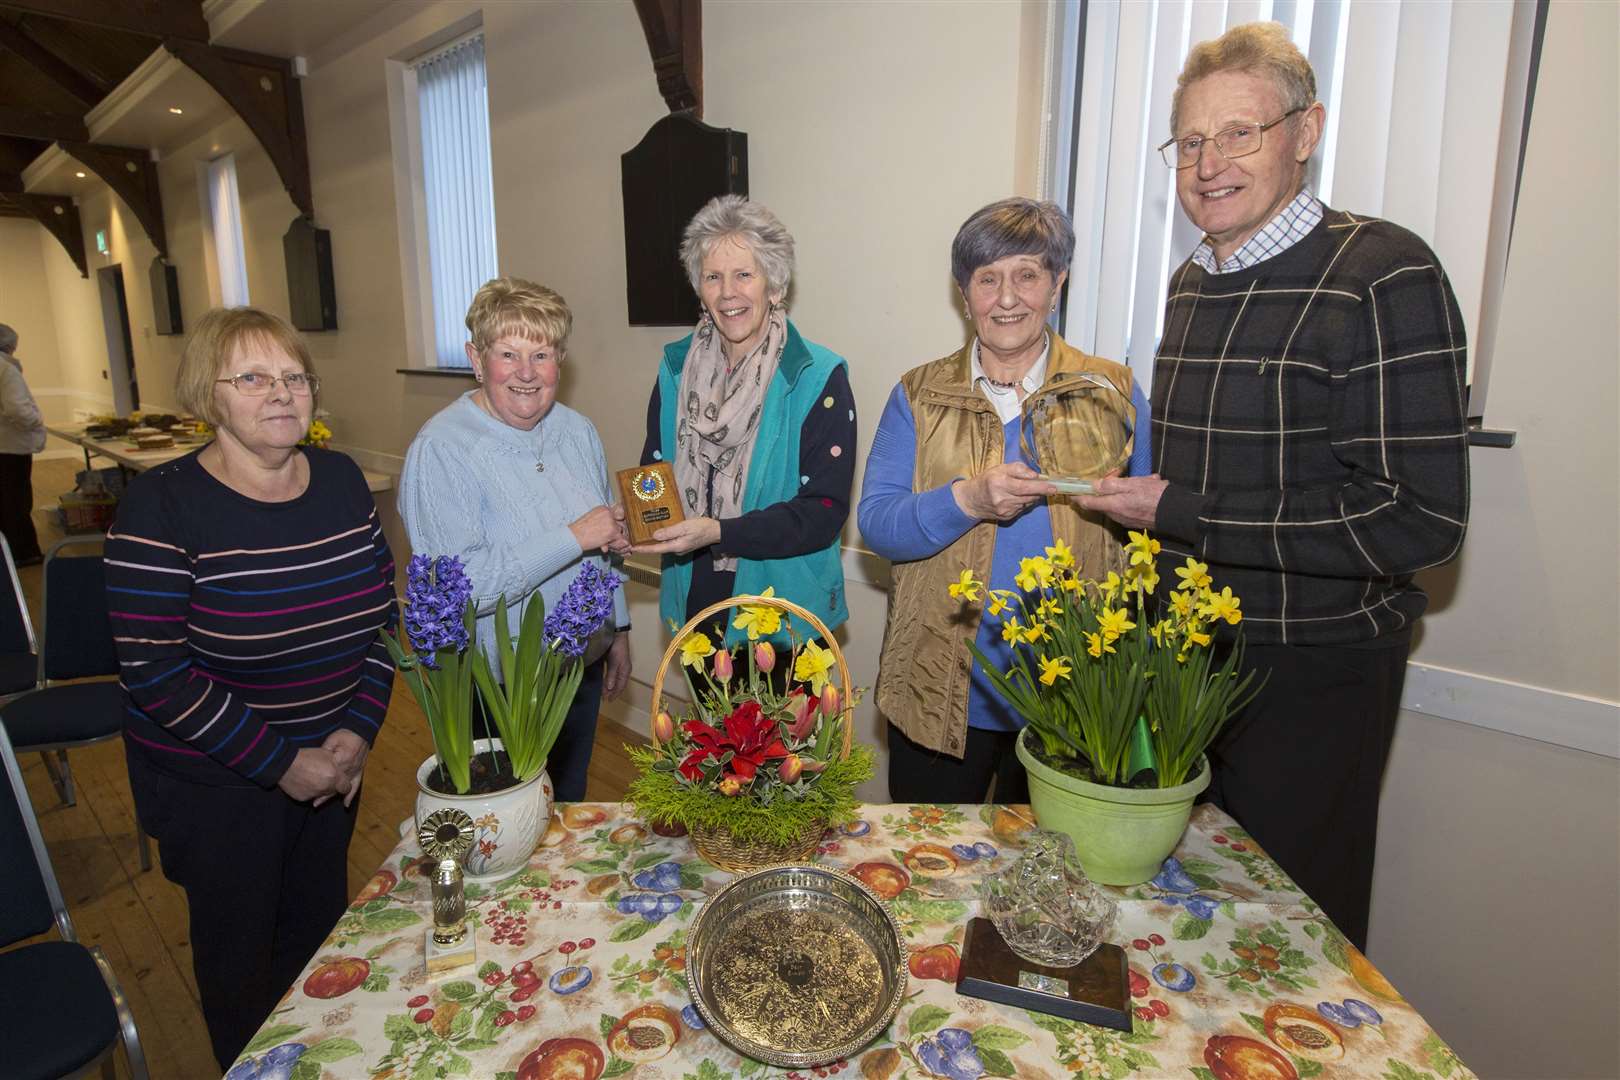 Marion Sutherland won the trophy for most points overall at Reiss Gardening Club's annual bulb show. She also won the trophies for bulbs and floral art. She is pictured receiving one of her trophies from show judge Bill Watson, while his wife and fellow judge Elaine (centre) presents the trophy for baking and preserves to Annette Sinclair. Looking on is Maureen Johnson who won the trophy for best exhibit with her amaryllis. Picture: Robert MacDonald / Northern Studios